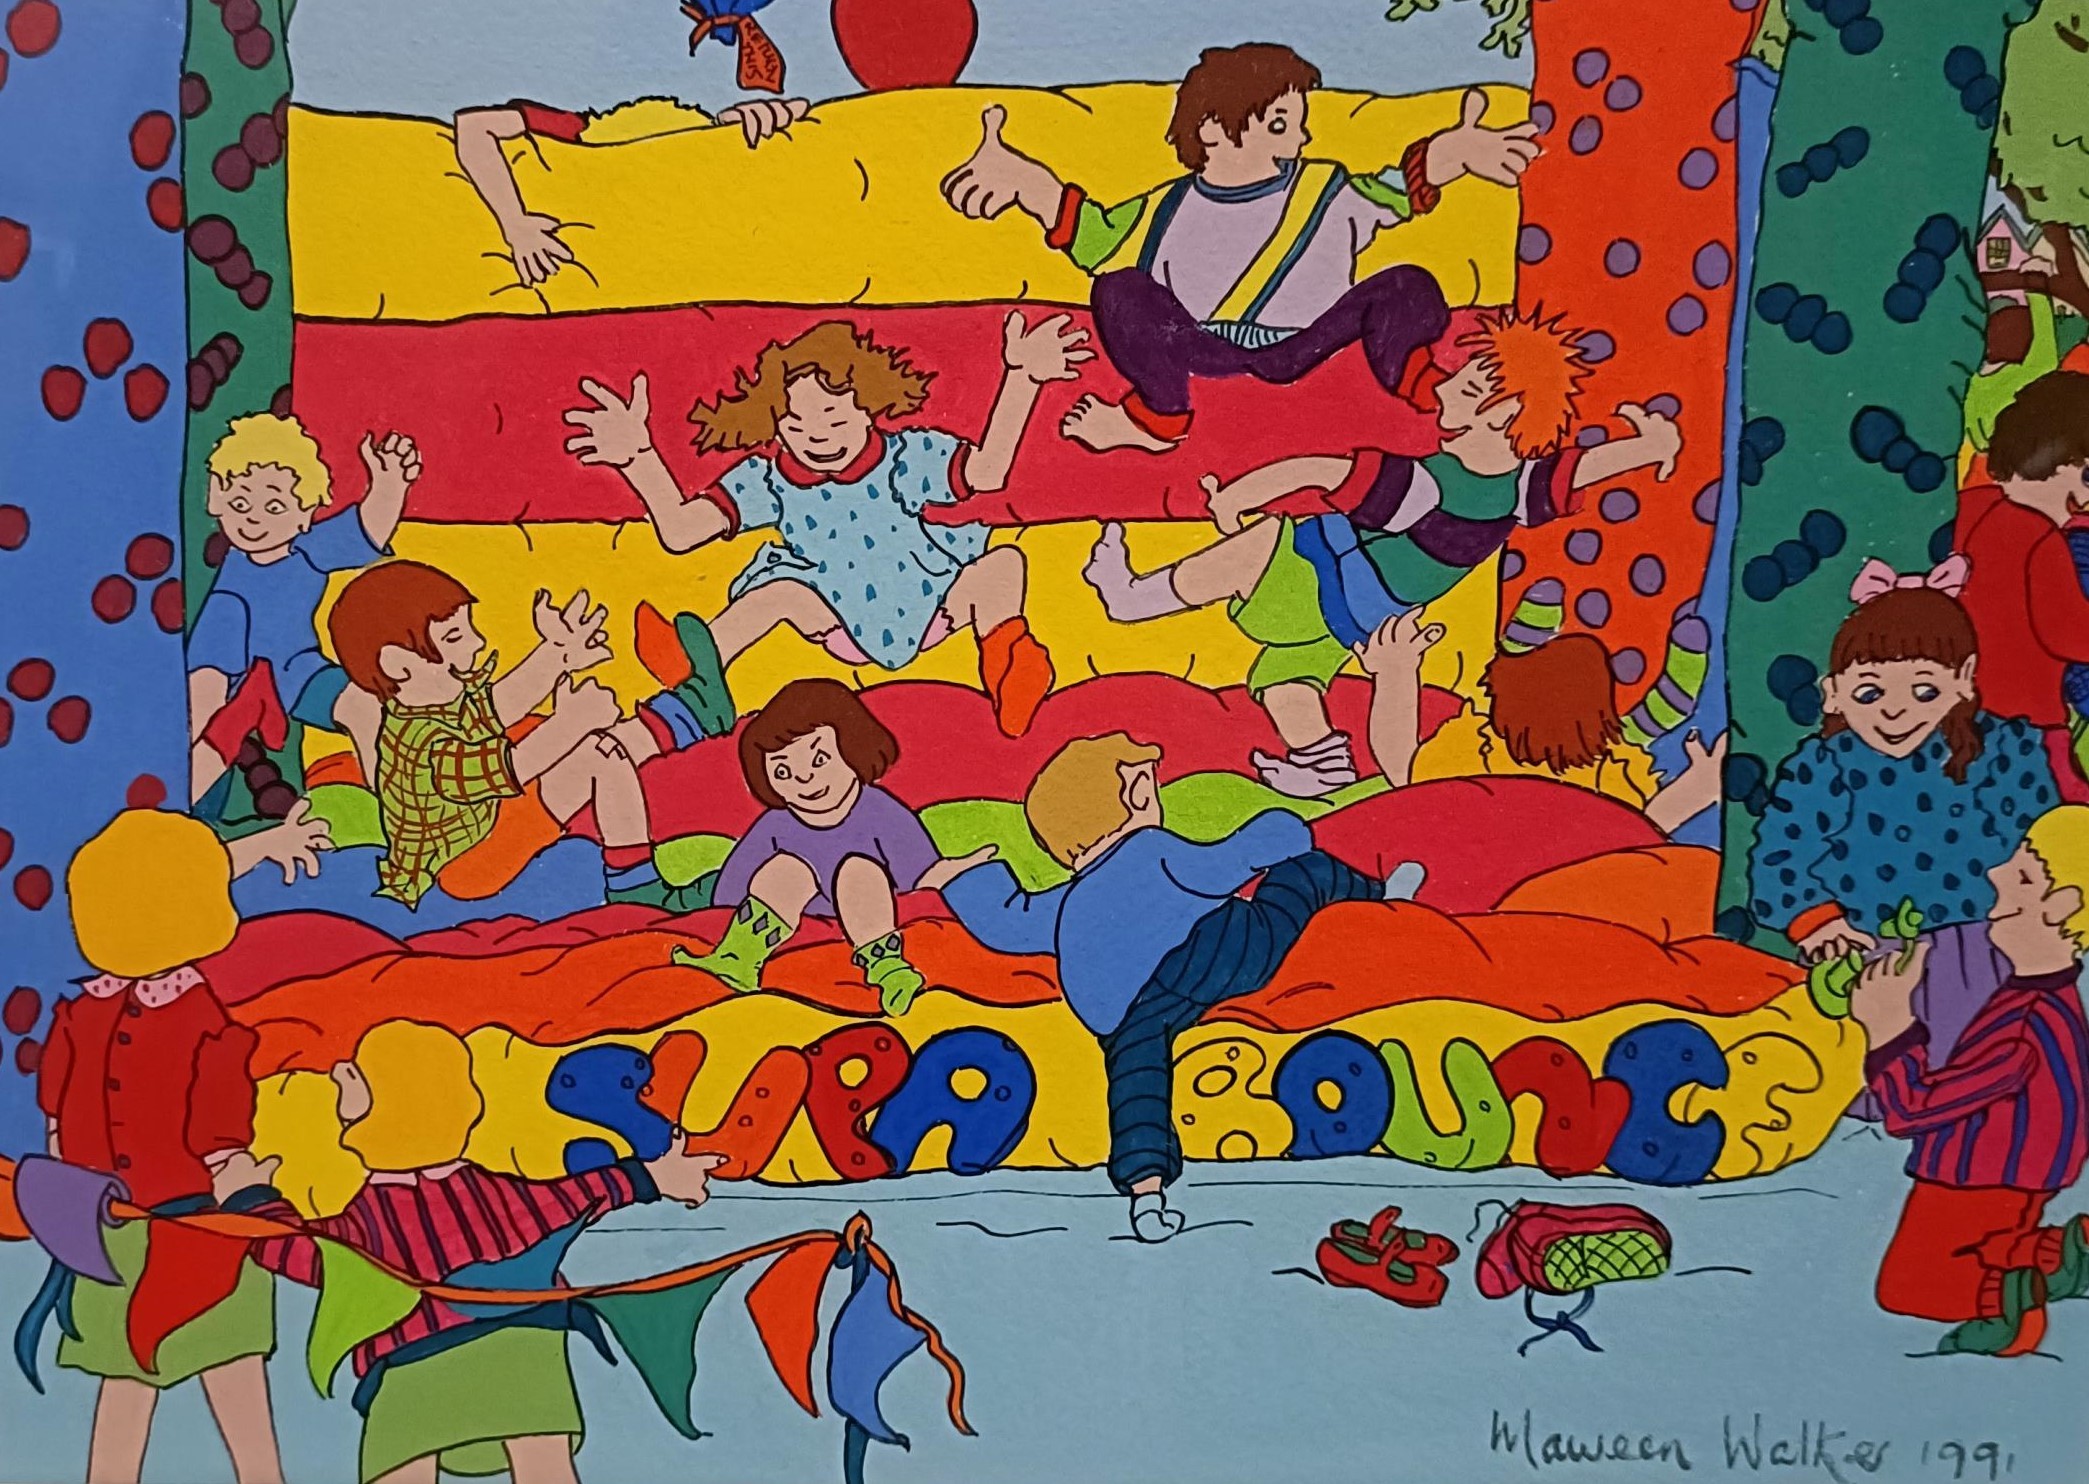 Maureen Walker, Bounce For Joy, gouache, signed and dated 1991, 21 x 30 cm